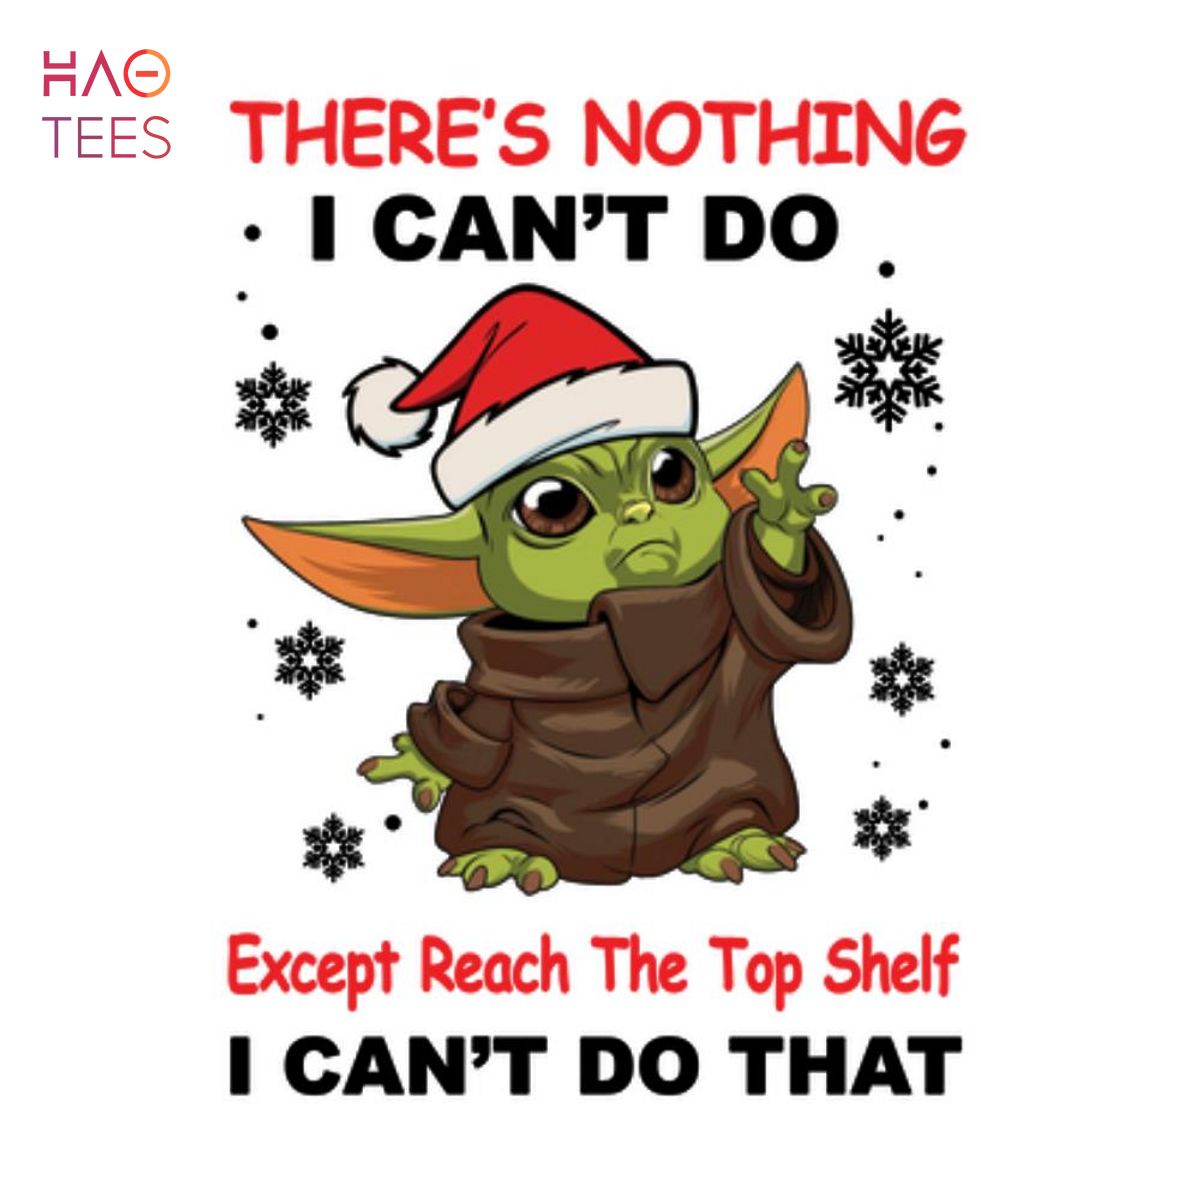 https://images.haotees.com/wp-content/uploads/2022/07/10133403/baby-yoda-theres-nothing-i-cant-do-funny-shirt-5-0TDfq.jpg